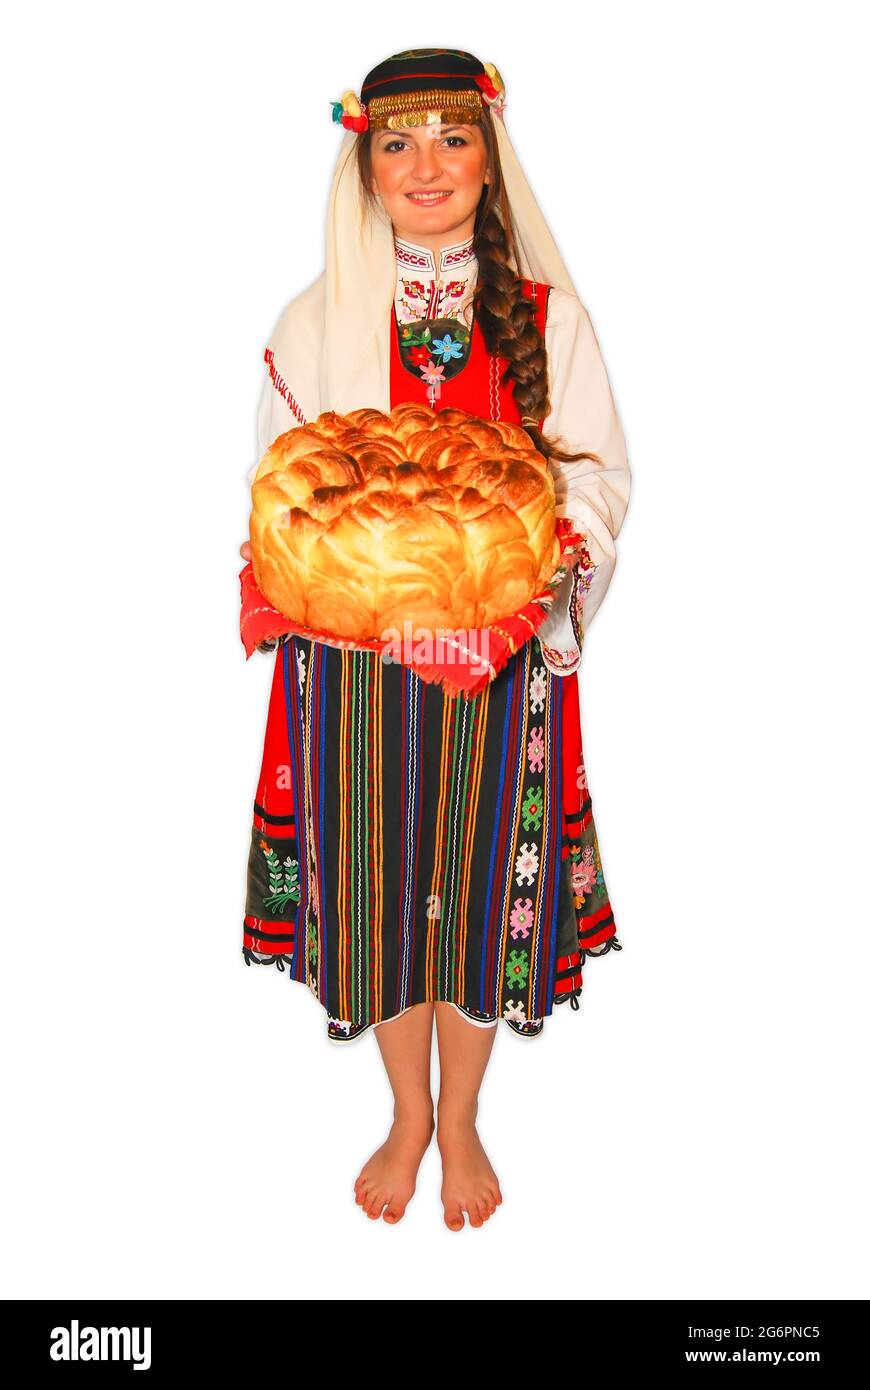 Young girl peasant with traditional Bulgarian folklore costume and sourdough bread in hand portrait isolated Stock Photo